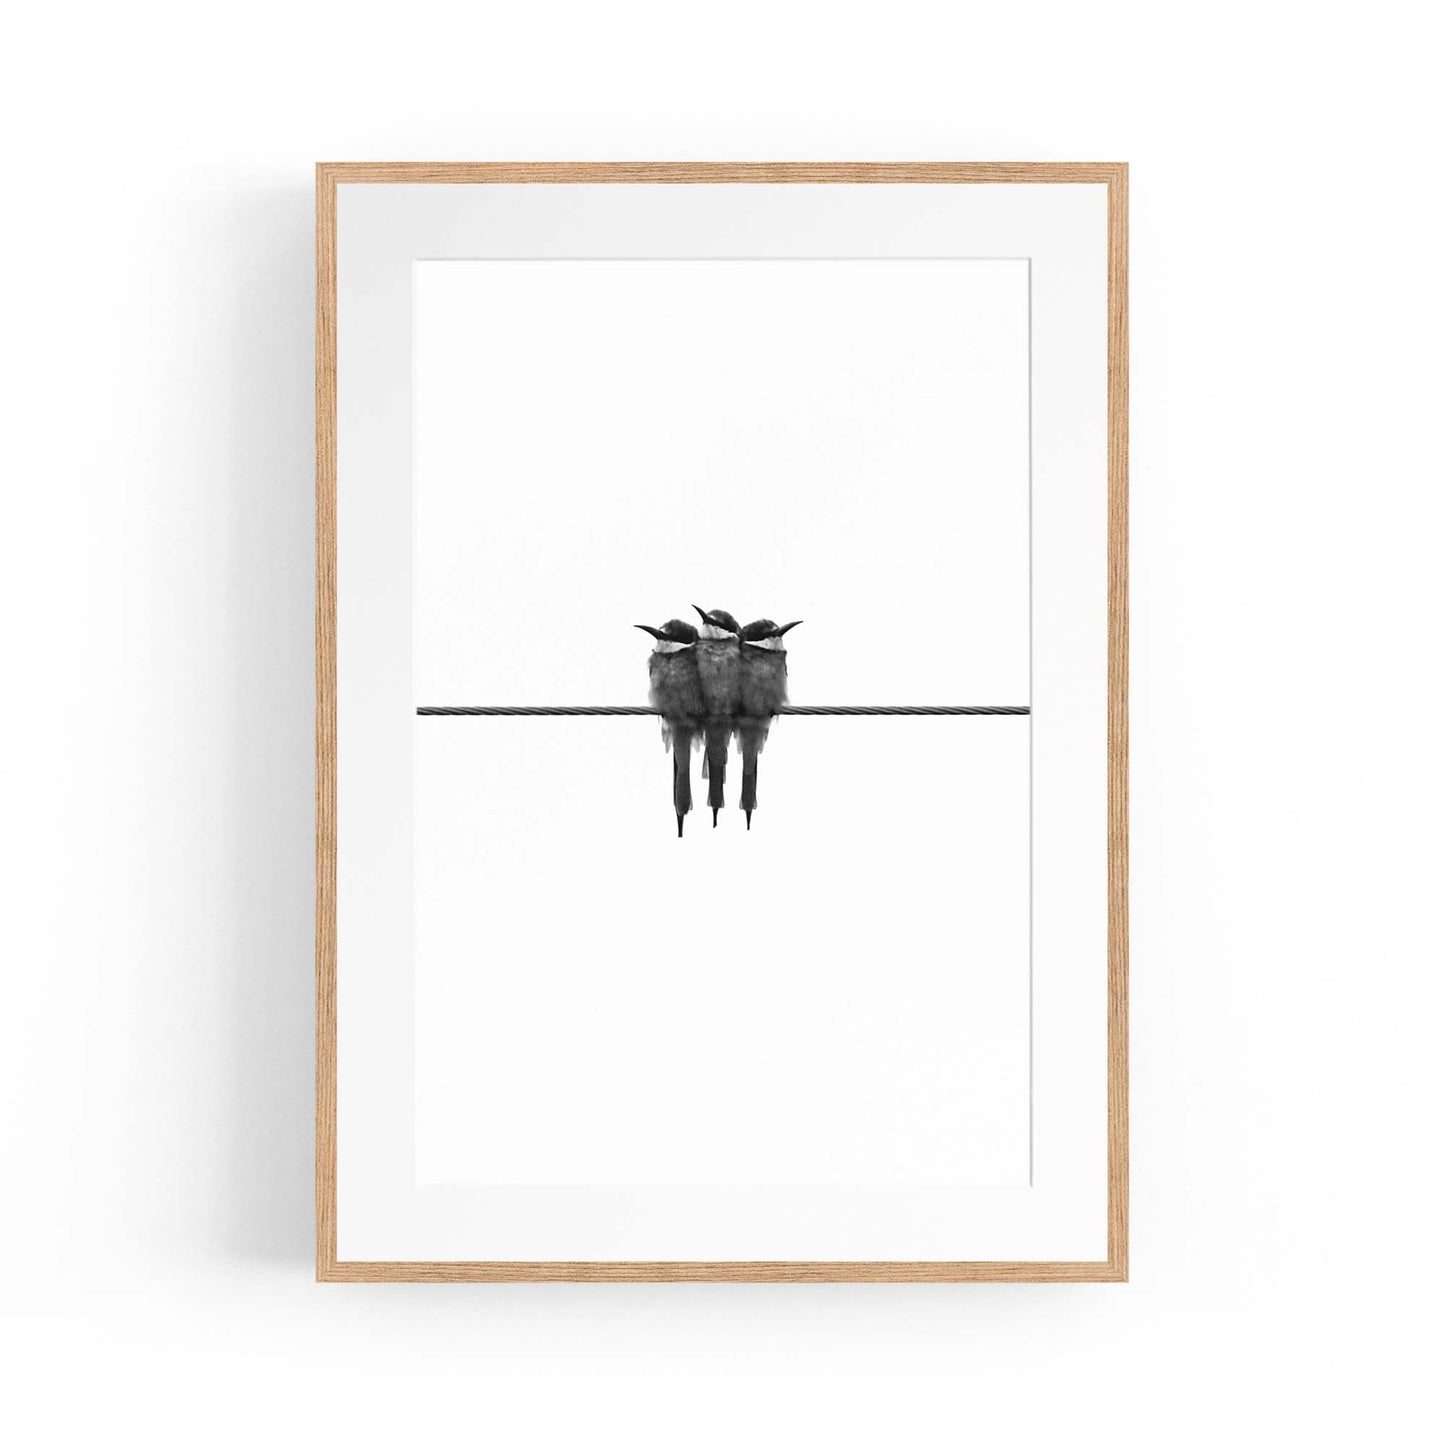 Abstract Bird on Wire Minimal Drawing Wall Art #2 - The Affordable Art Company